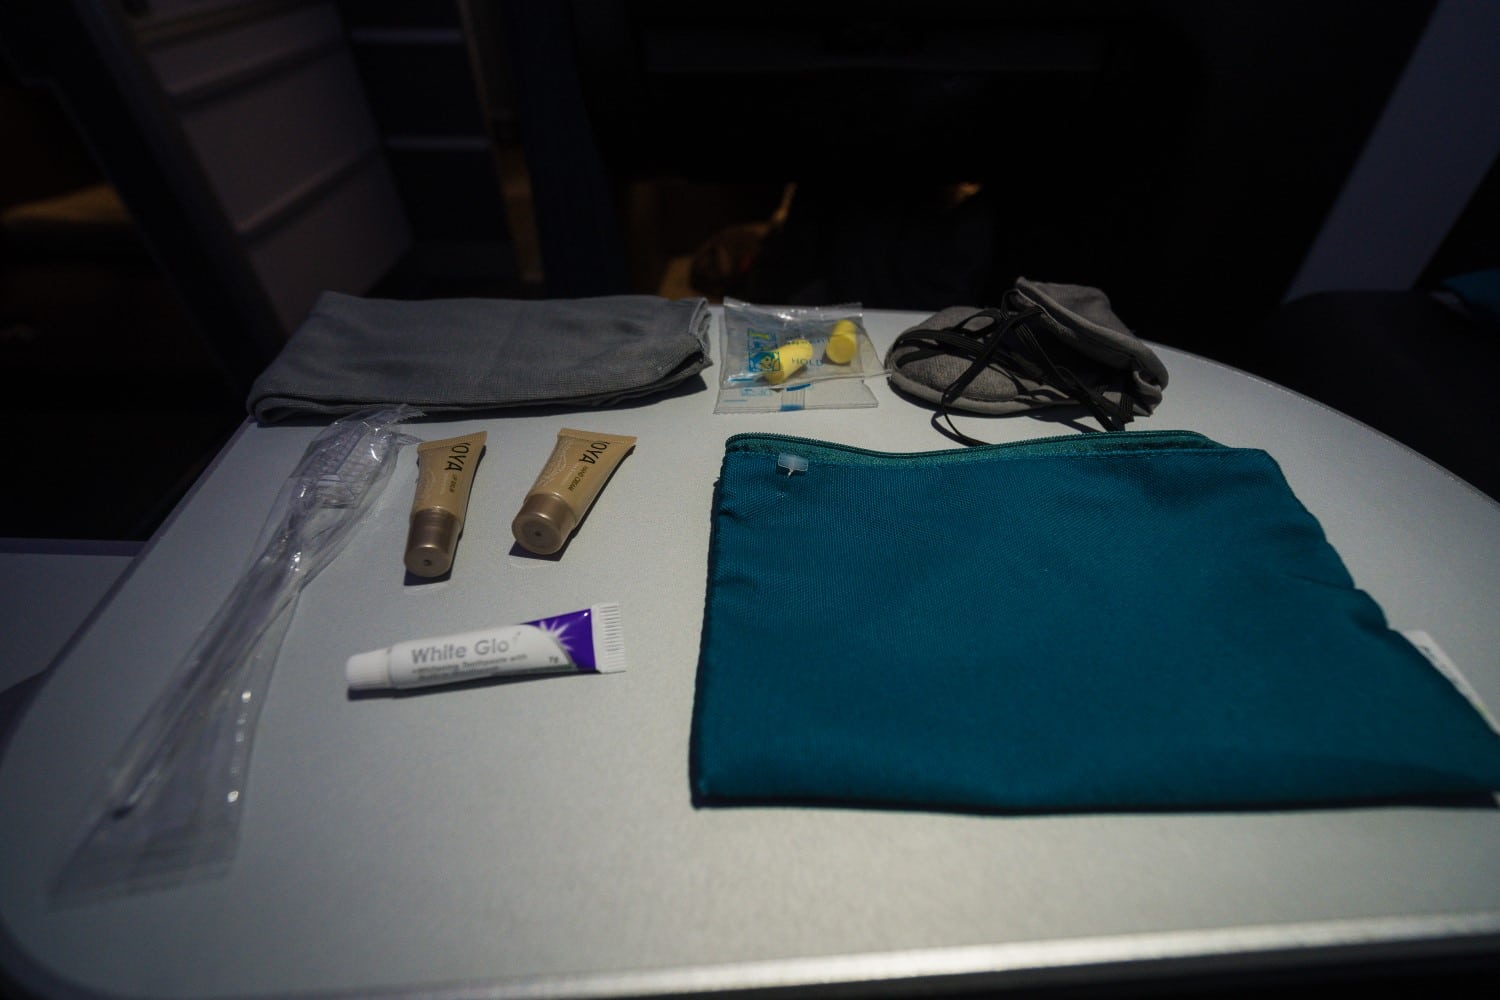 Amenity kit on Aer Lingus business class flight, including toothpaste, brush, socks, ear plugs, and a mask.